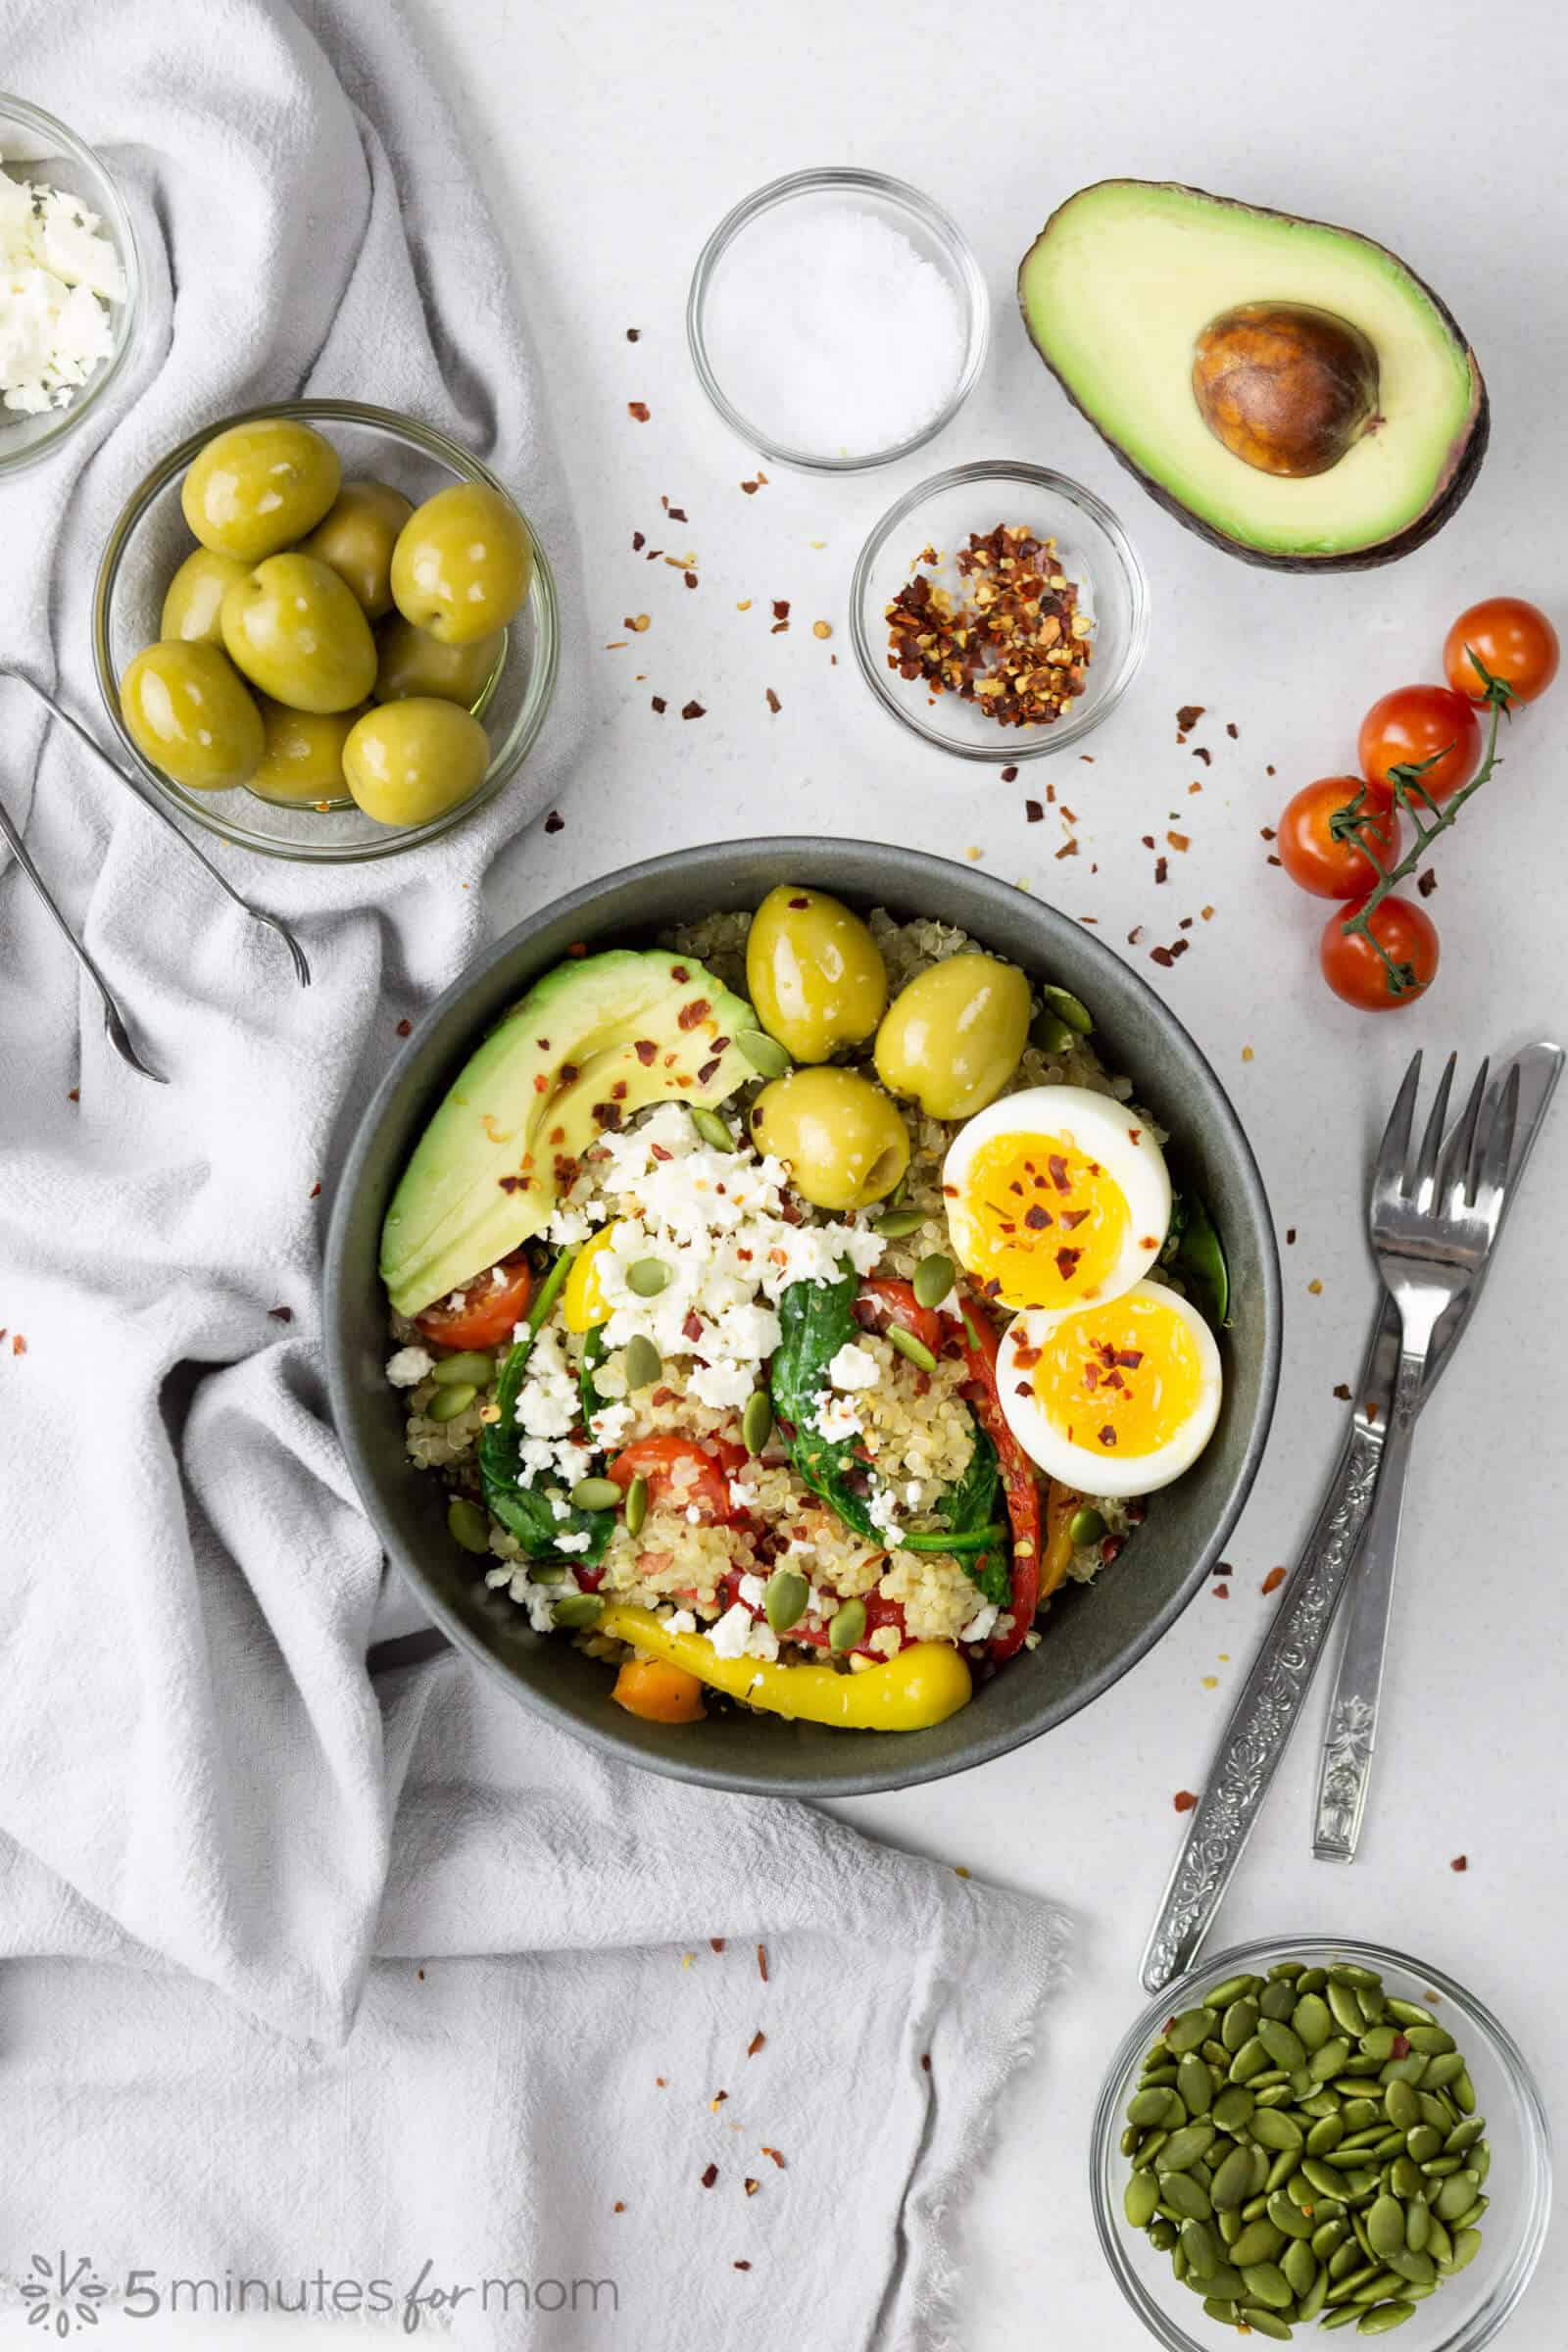 a spread of food on grey table that includes a bowl with quinoa, sauteed vegetables, avocado slices, soft boiled egg, and three large green olives